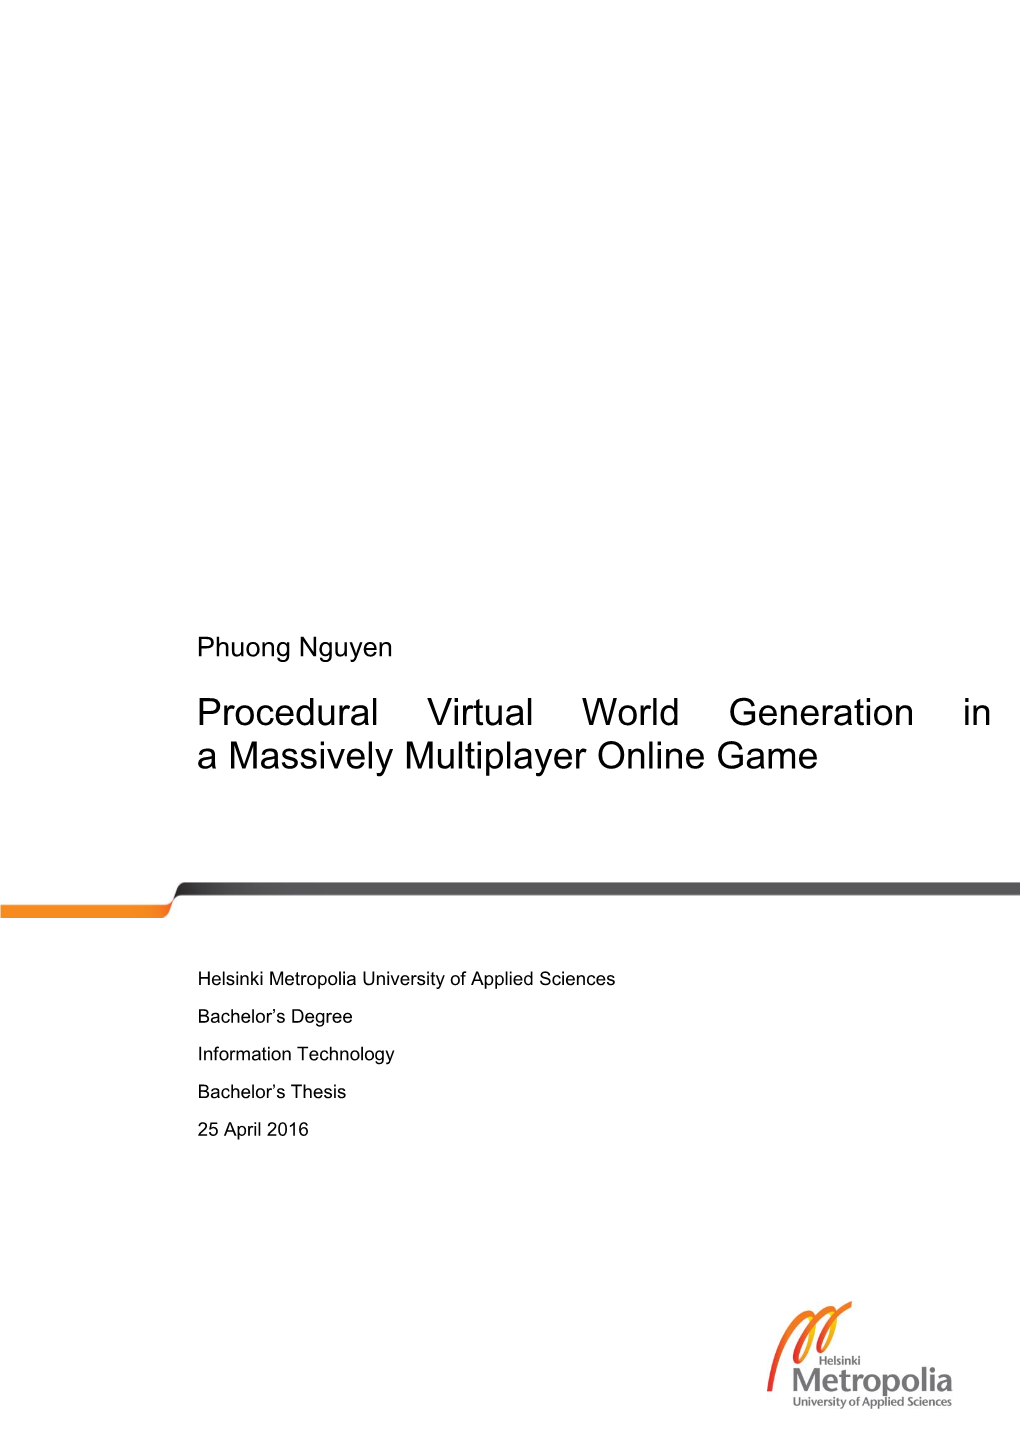 Procedural Virtual World Generation in a Massively Multiplayer Online Game